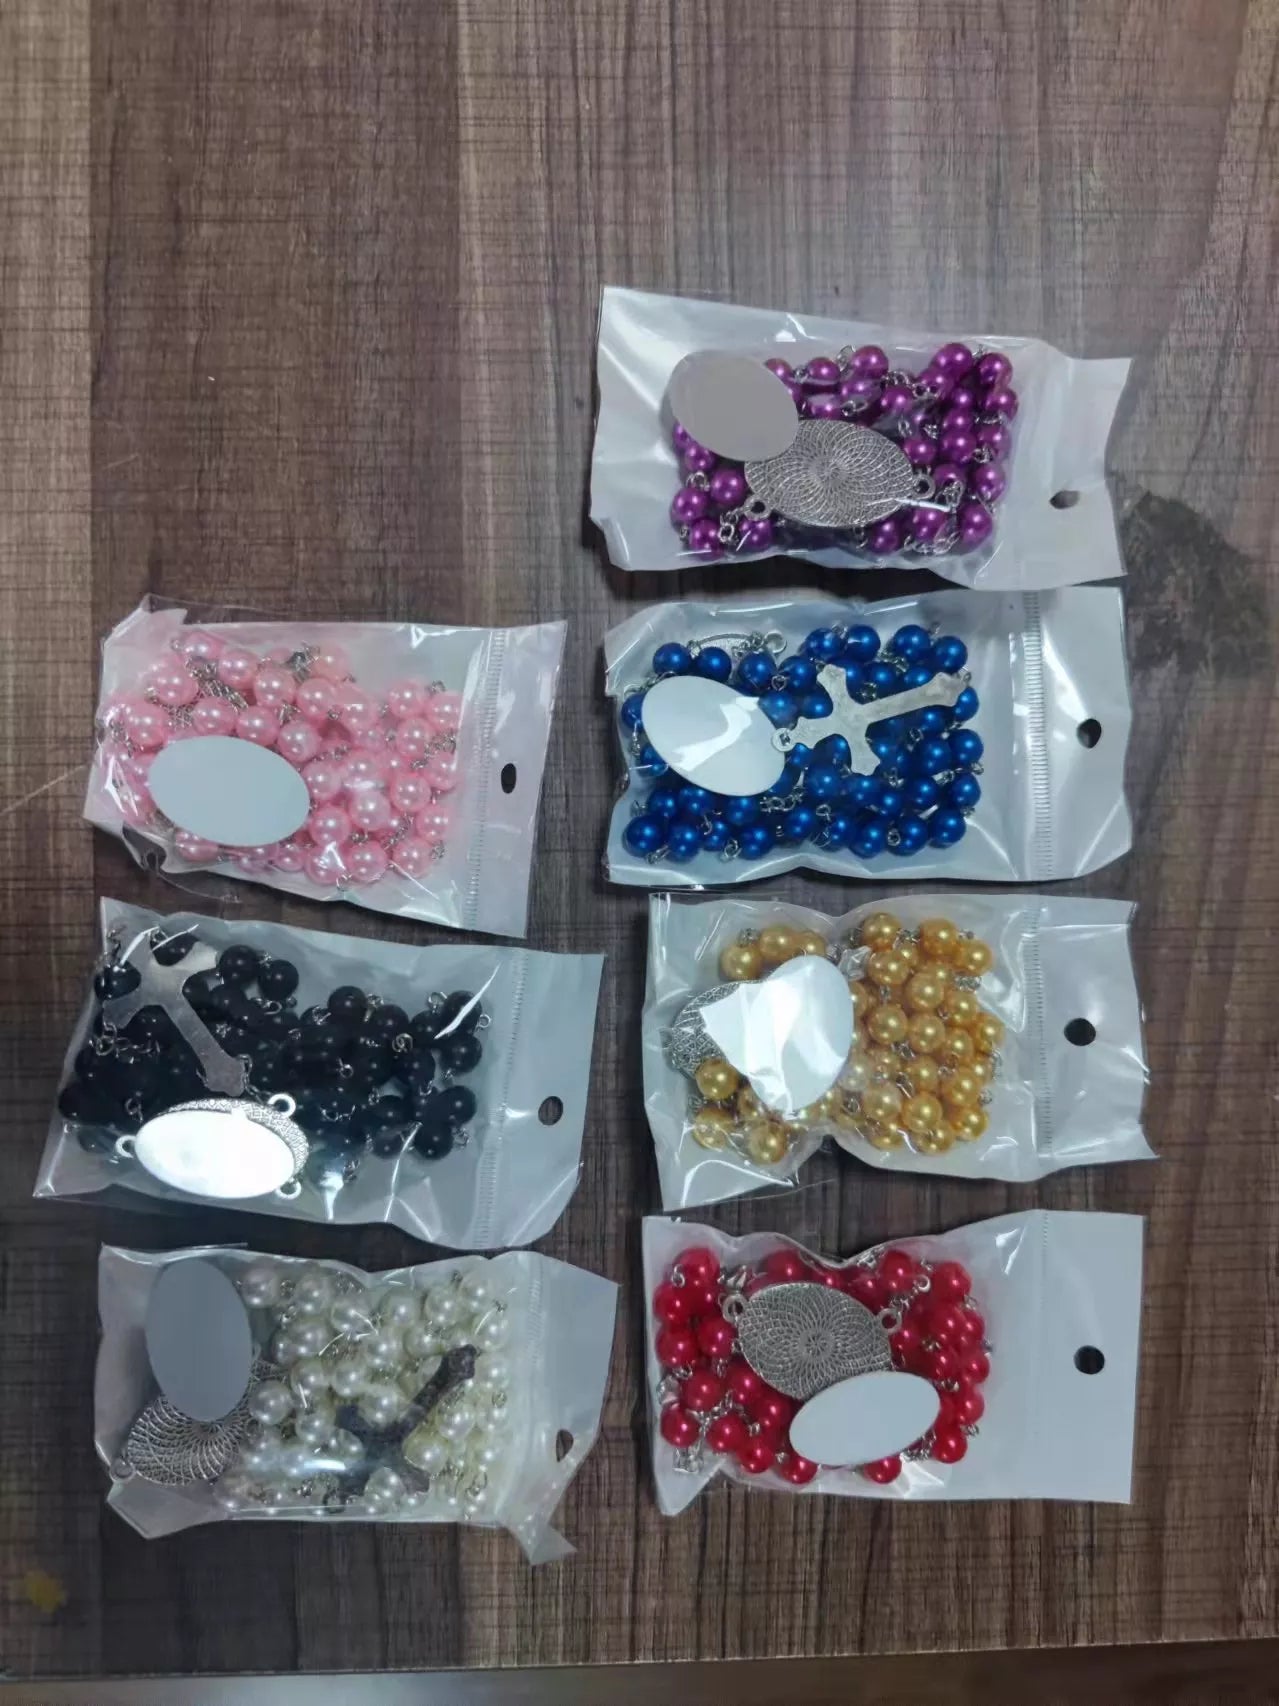 sublimation blank pearl like rosary necklace 59 beads in stock,8 colors in option - SP Sublimation